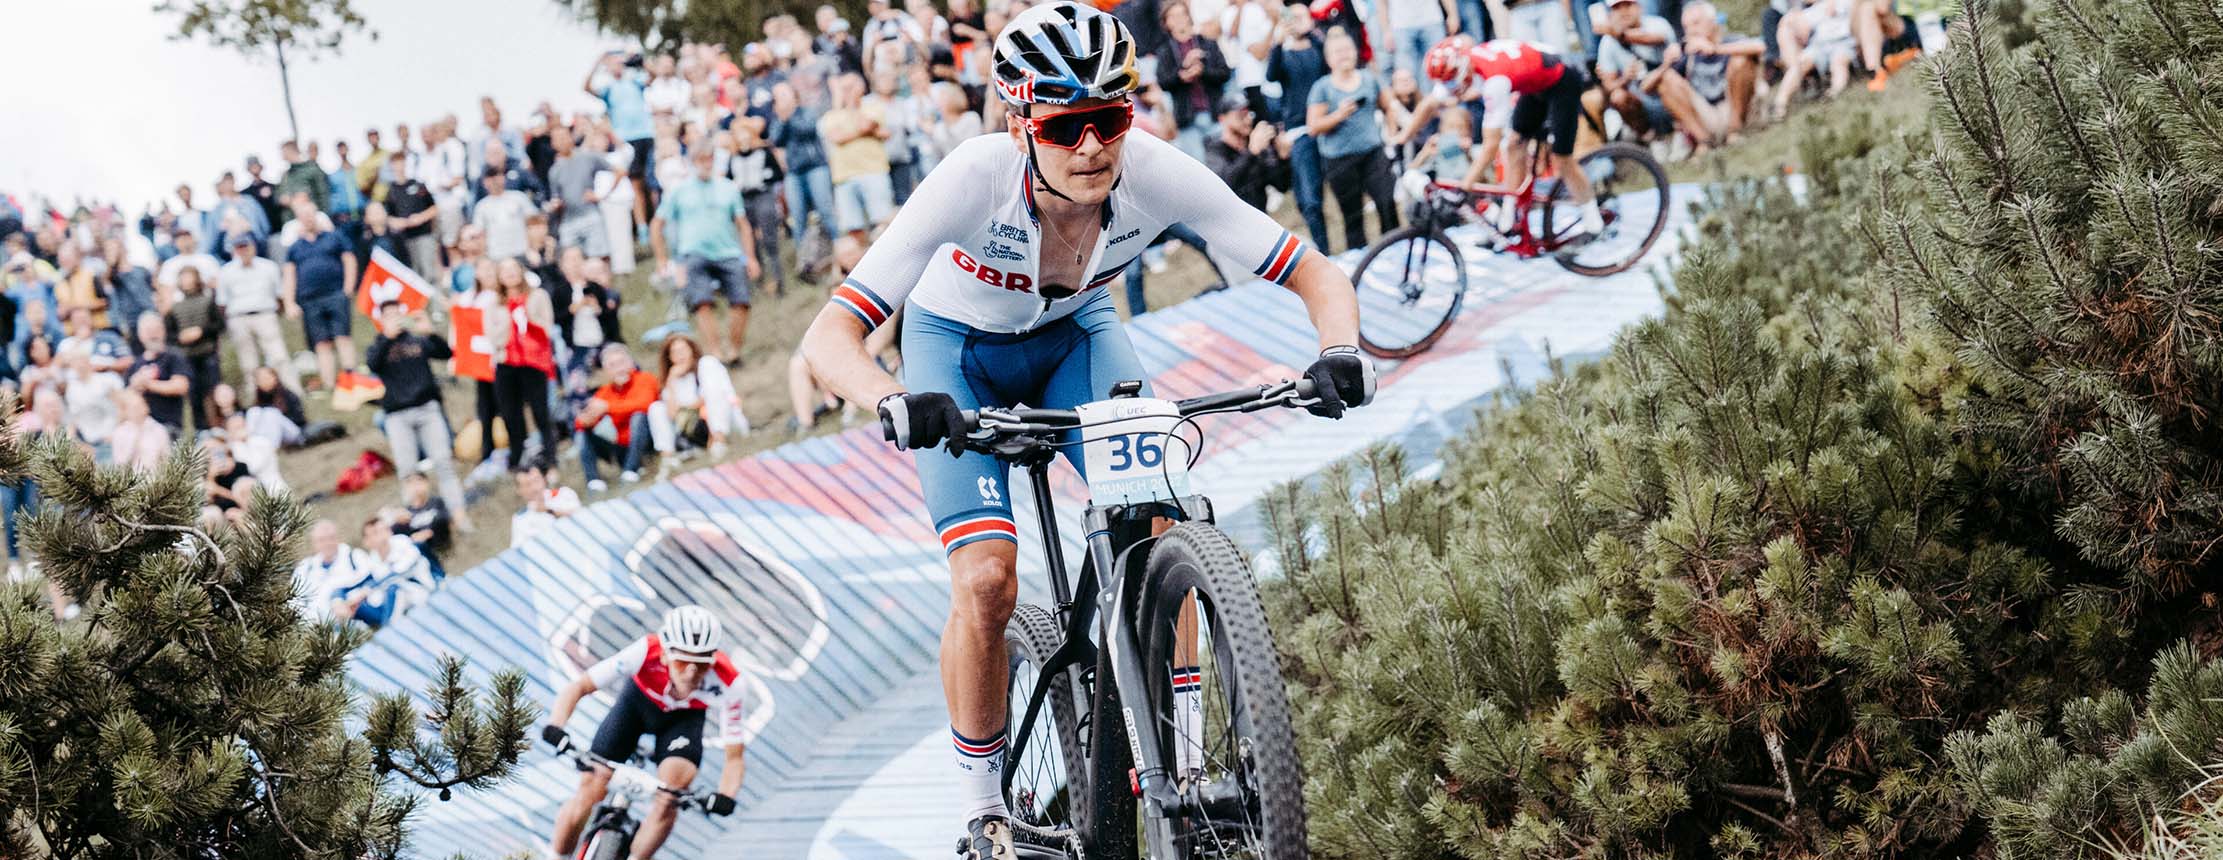 Thomas pidcock of great britain as he rides to gold in the men’s mountain bike competition during the european championships 2022 at munich, germany on august 19, 2022